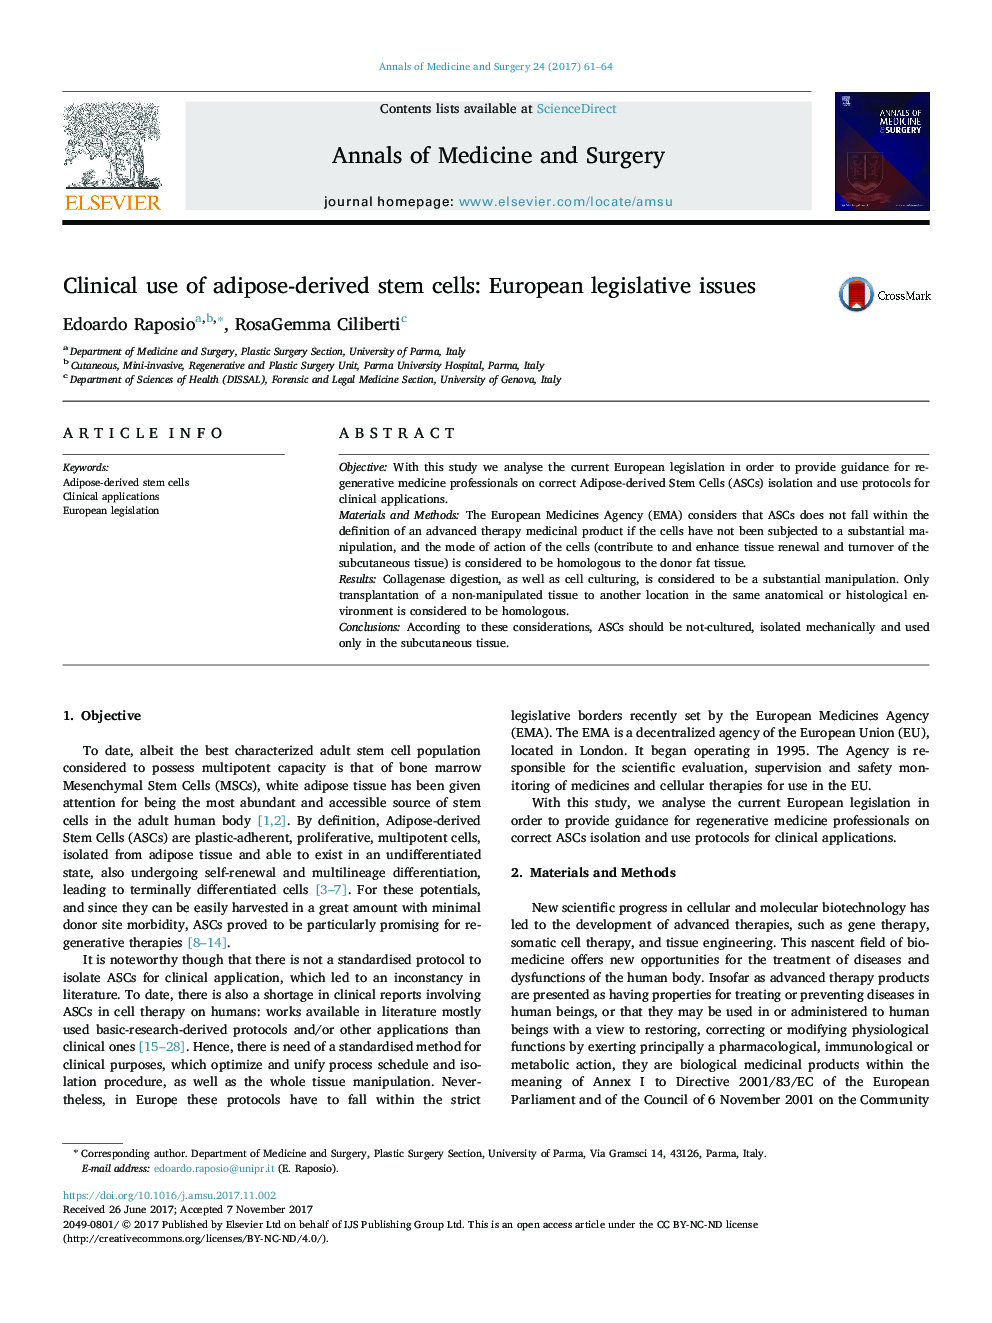 Clinical use of adipose-derived stem cells: European legislative issues